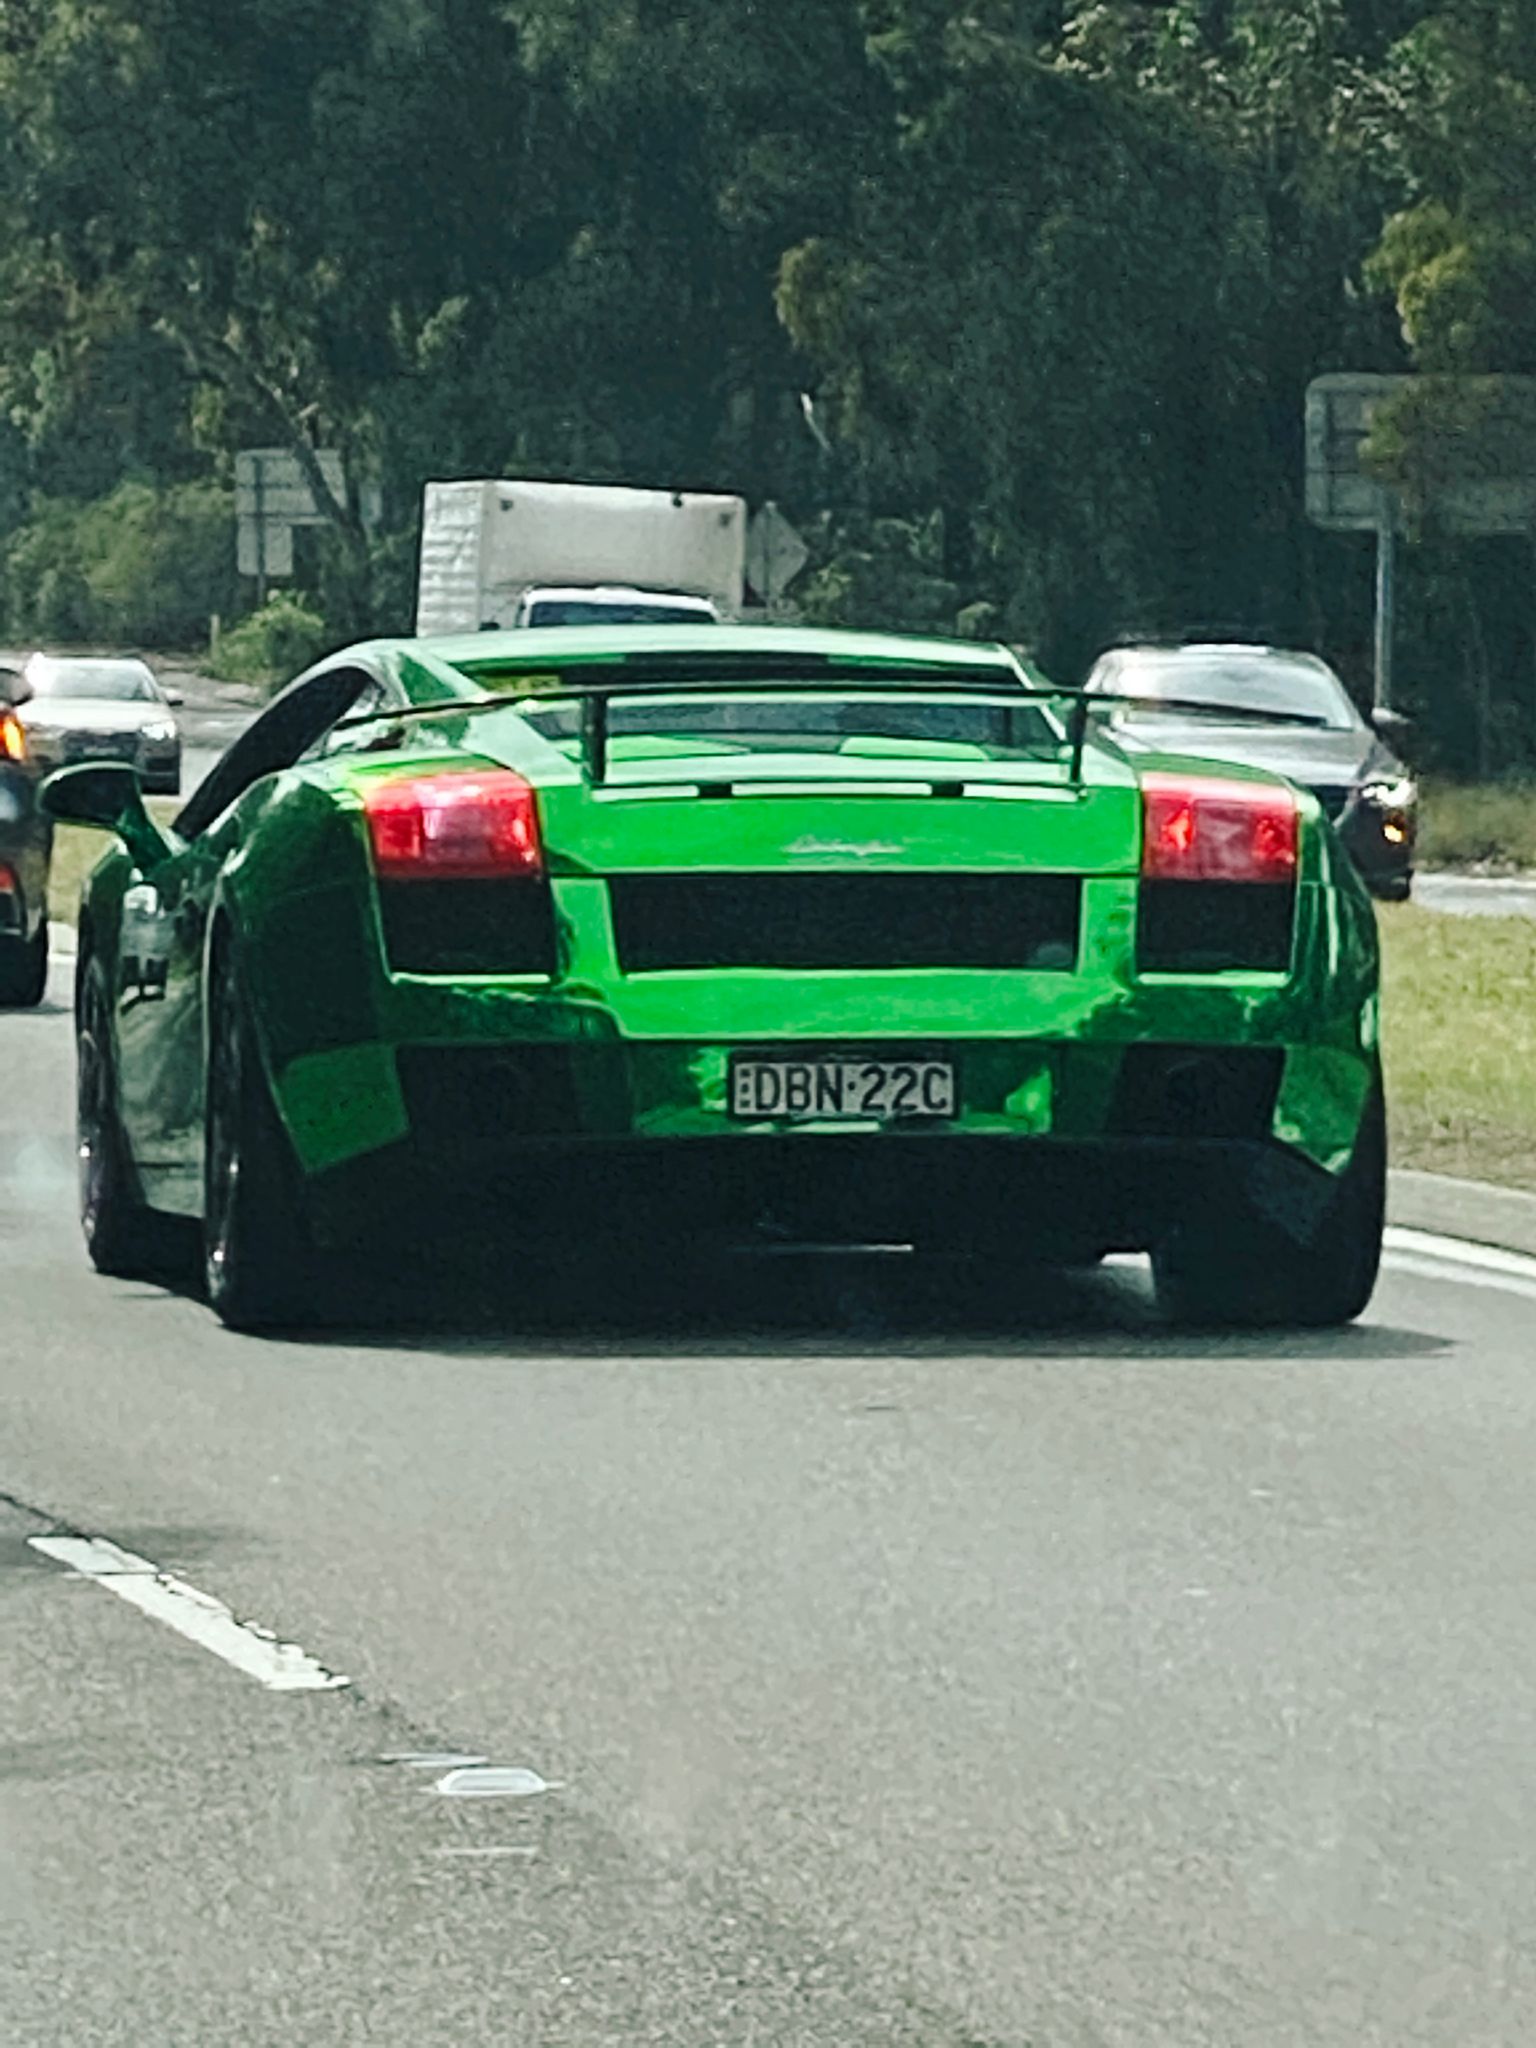 A photo of the rear of an EXTREMELY tacky-looking green shiny chromed Lamborghini.